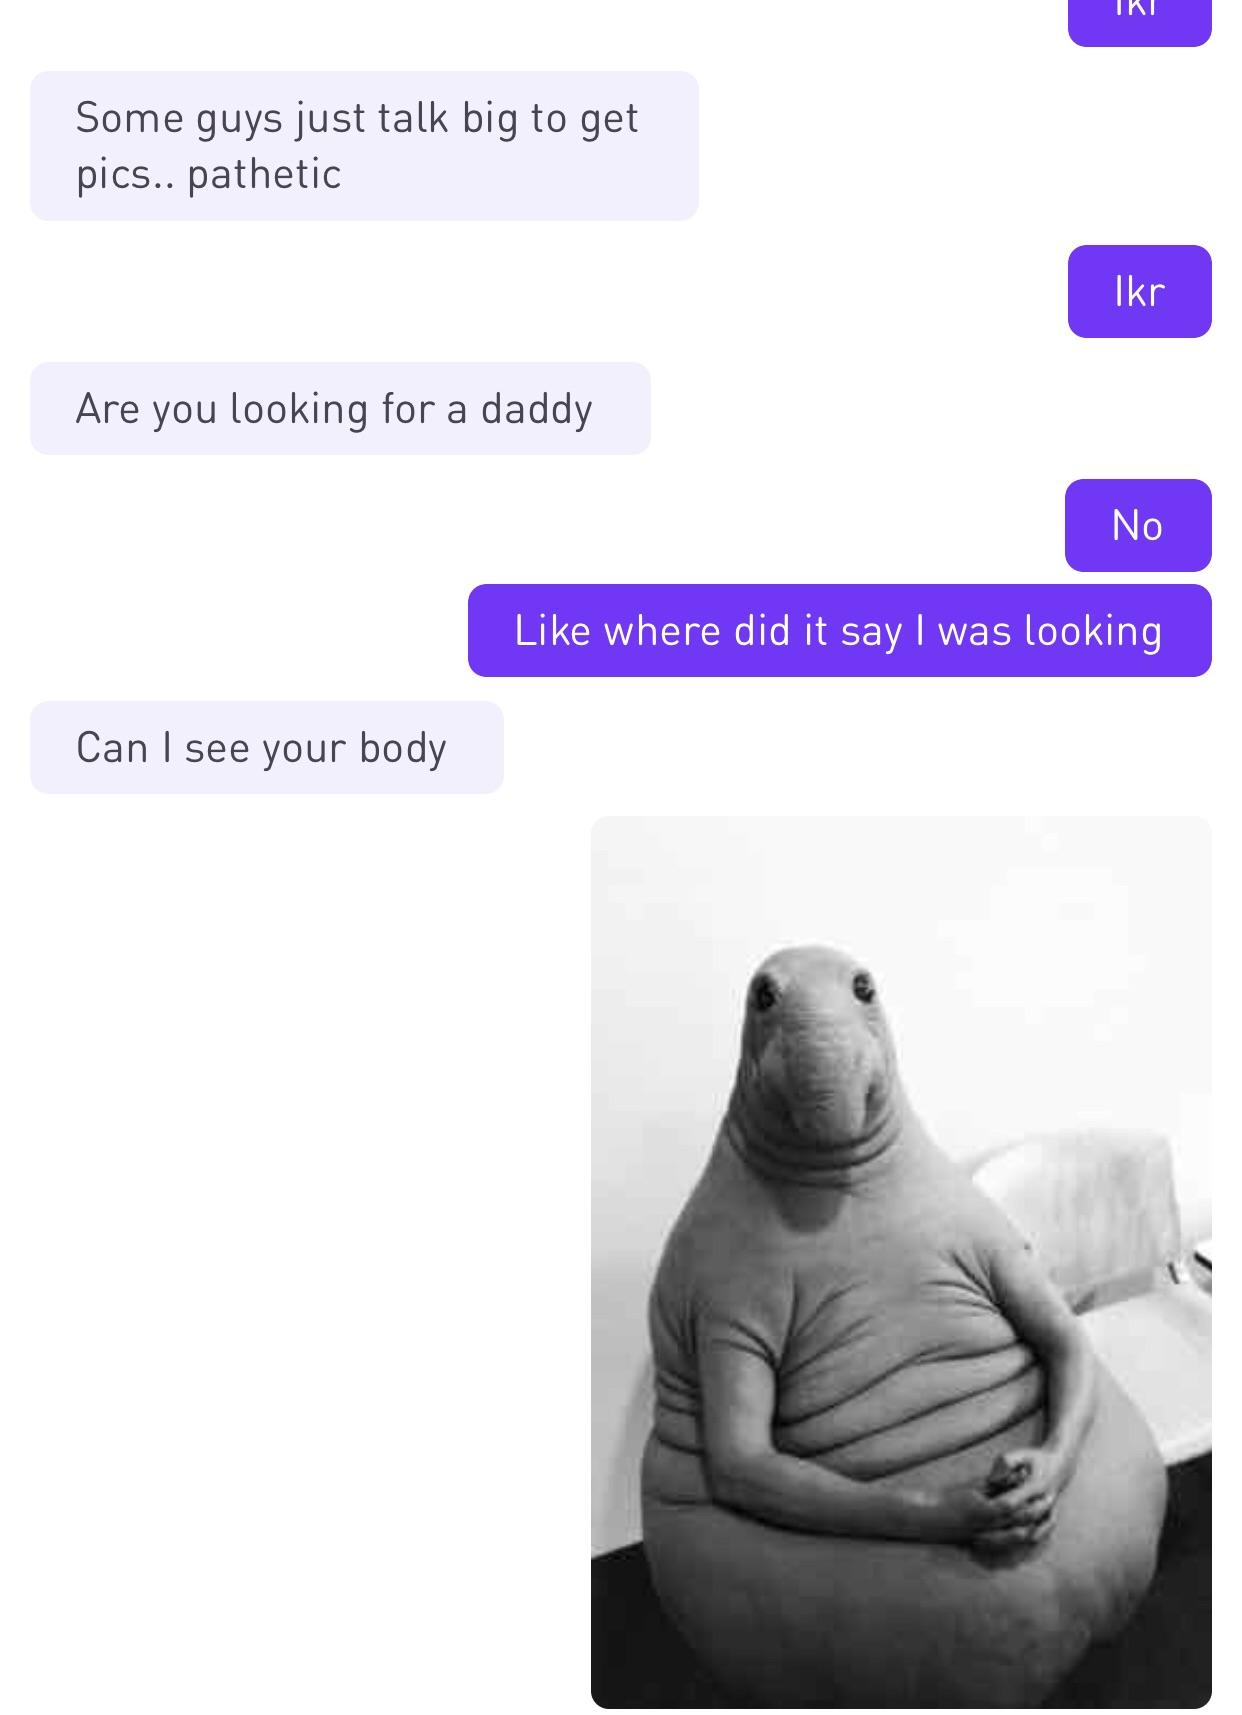 wosh reddit - Iki Some guys just talk big to get pics.. pathetic Ikr Are you looking for a daddy No where did it say I was looking Can I see your body